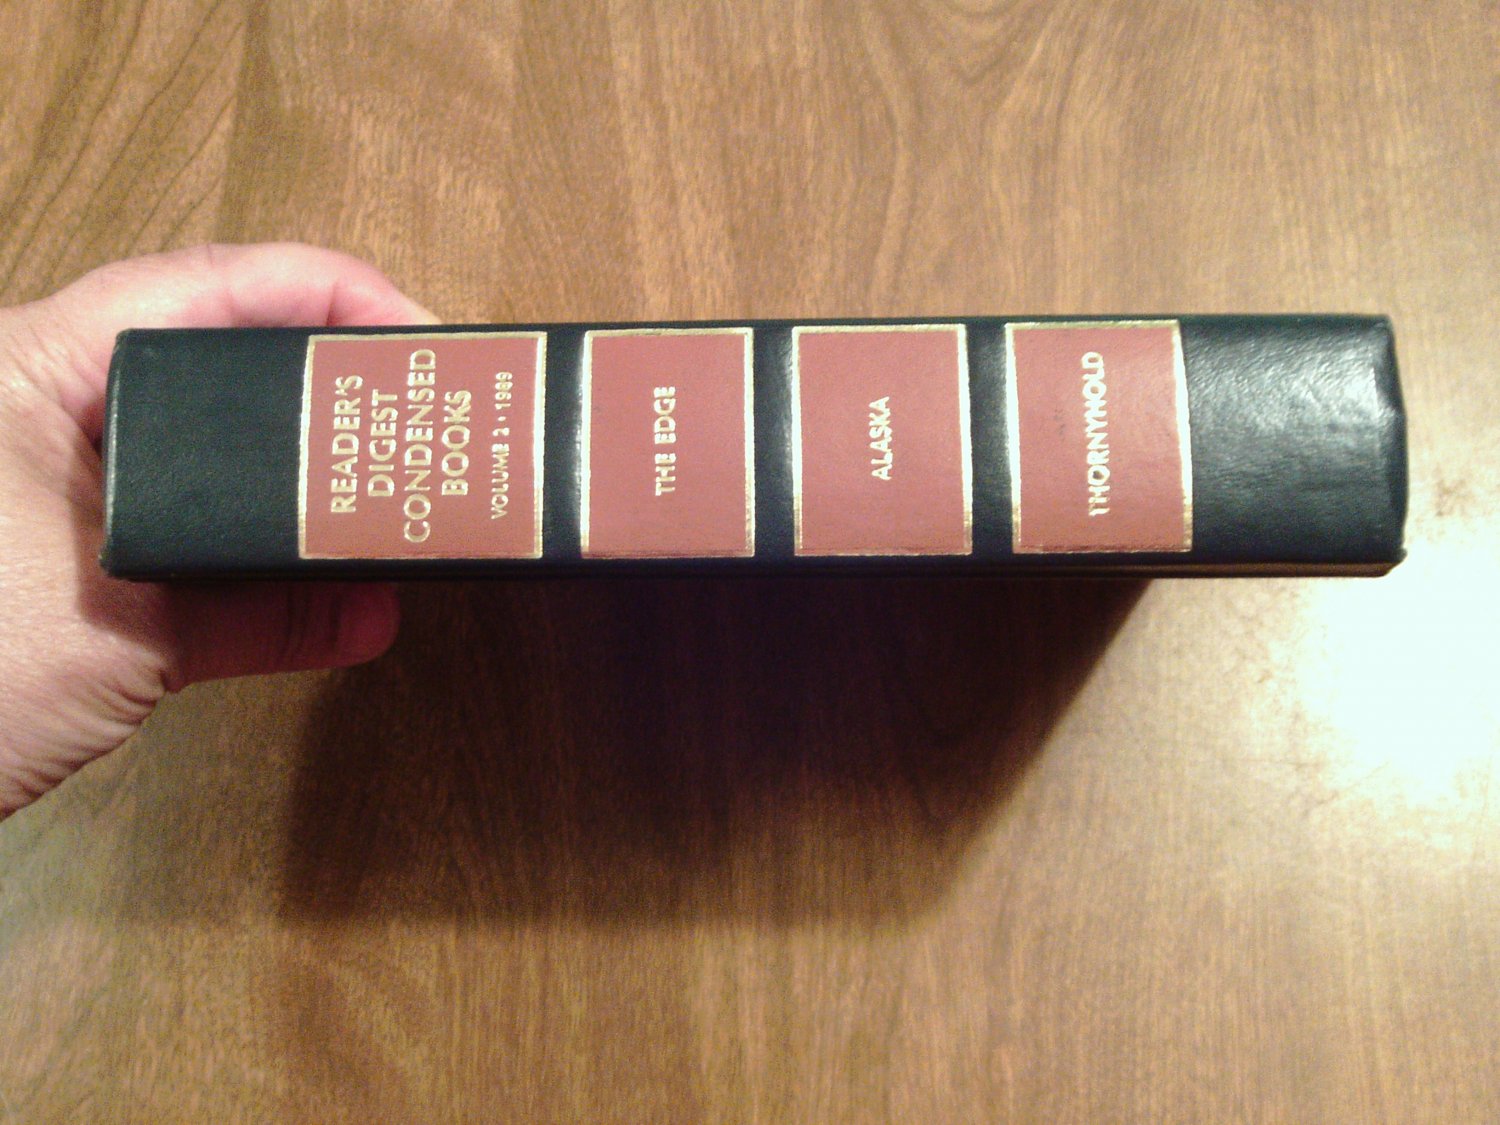 Readers Digest Condensed Books Volume 2 1989 G1a Dick Francis James A Michener Mary Stewart Hc